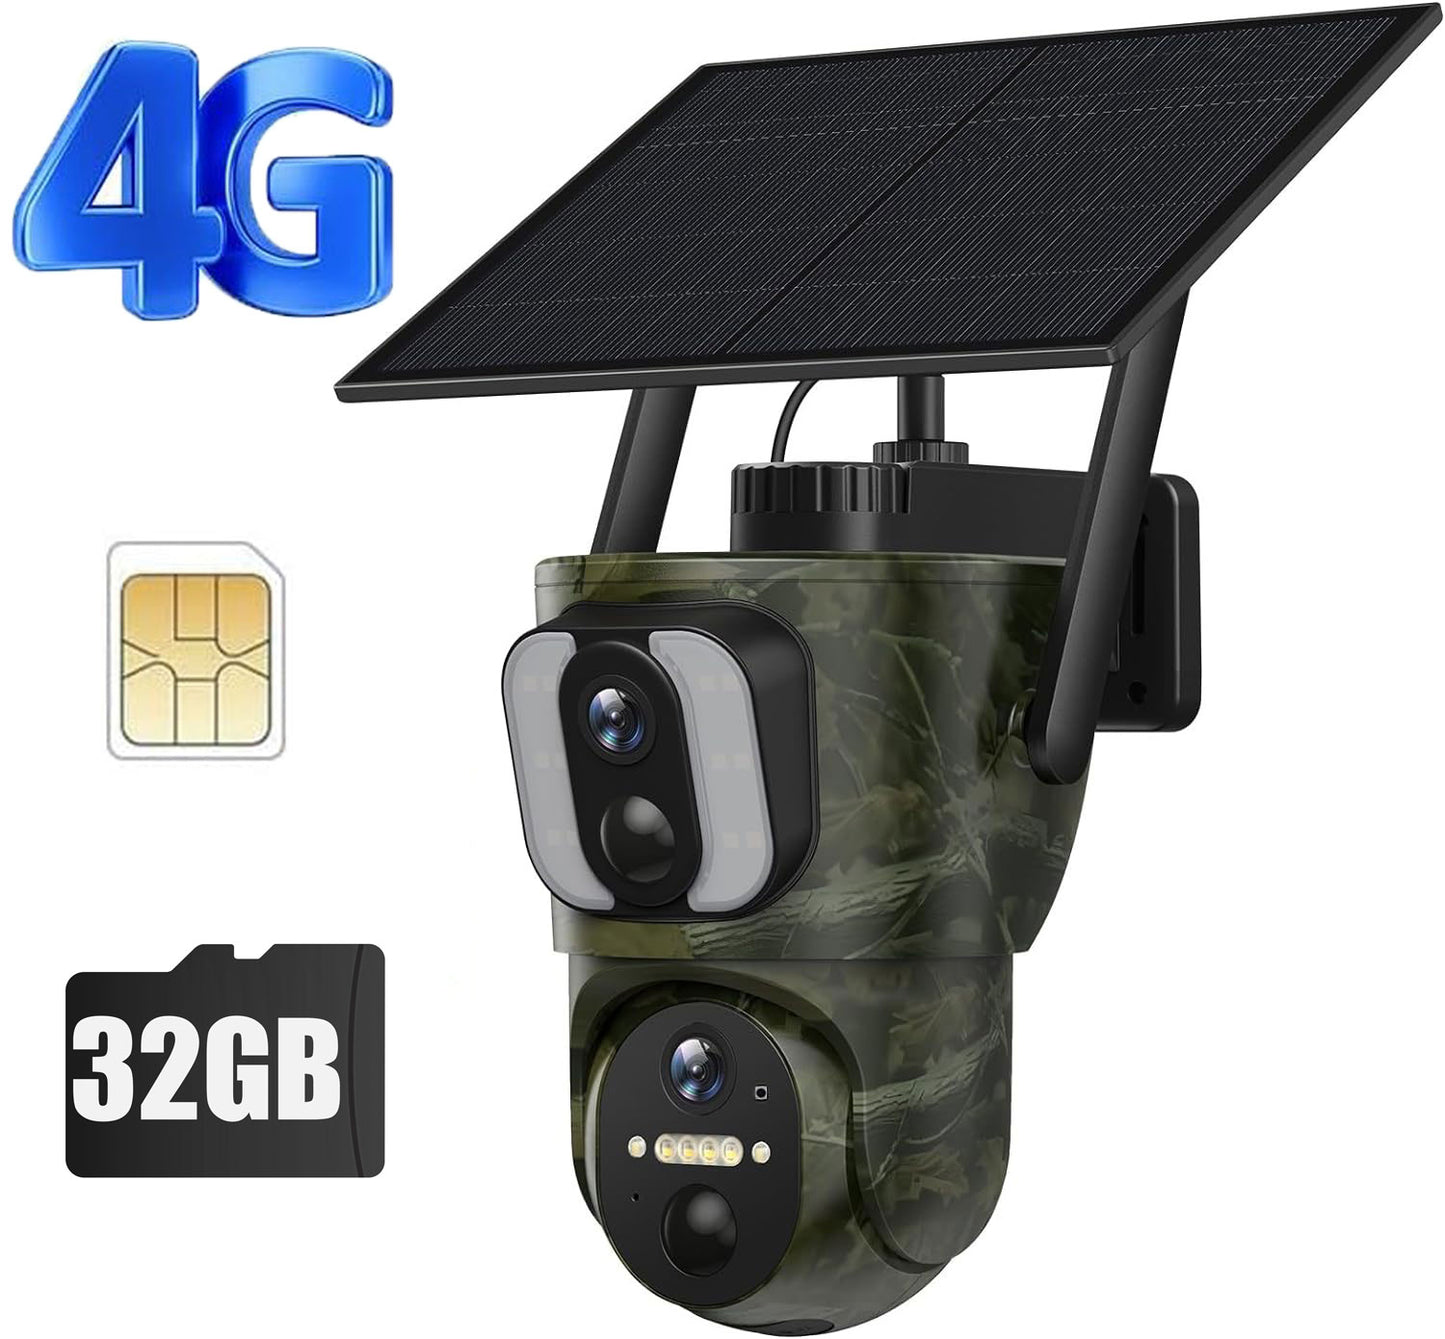 TOGUARD 4G LTE Cellular Trail Camera with SD Card Dual Len Wireless 1080P Pan Tilt Solar Hunting Game Camera Color Night Vision 360° Full View Waterproof IP66 Motion Alert for Wildlife Monitoring